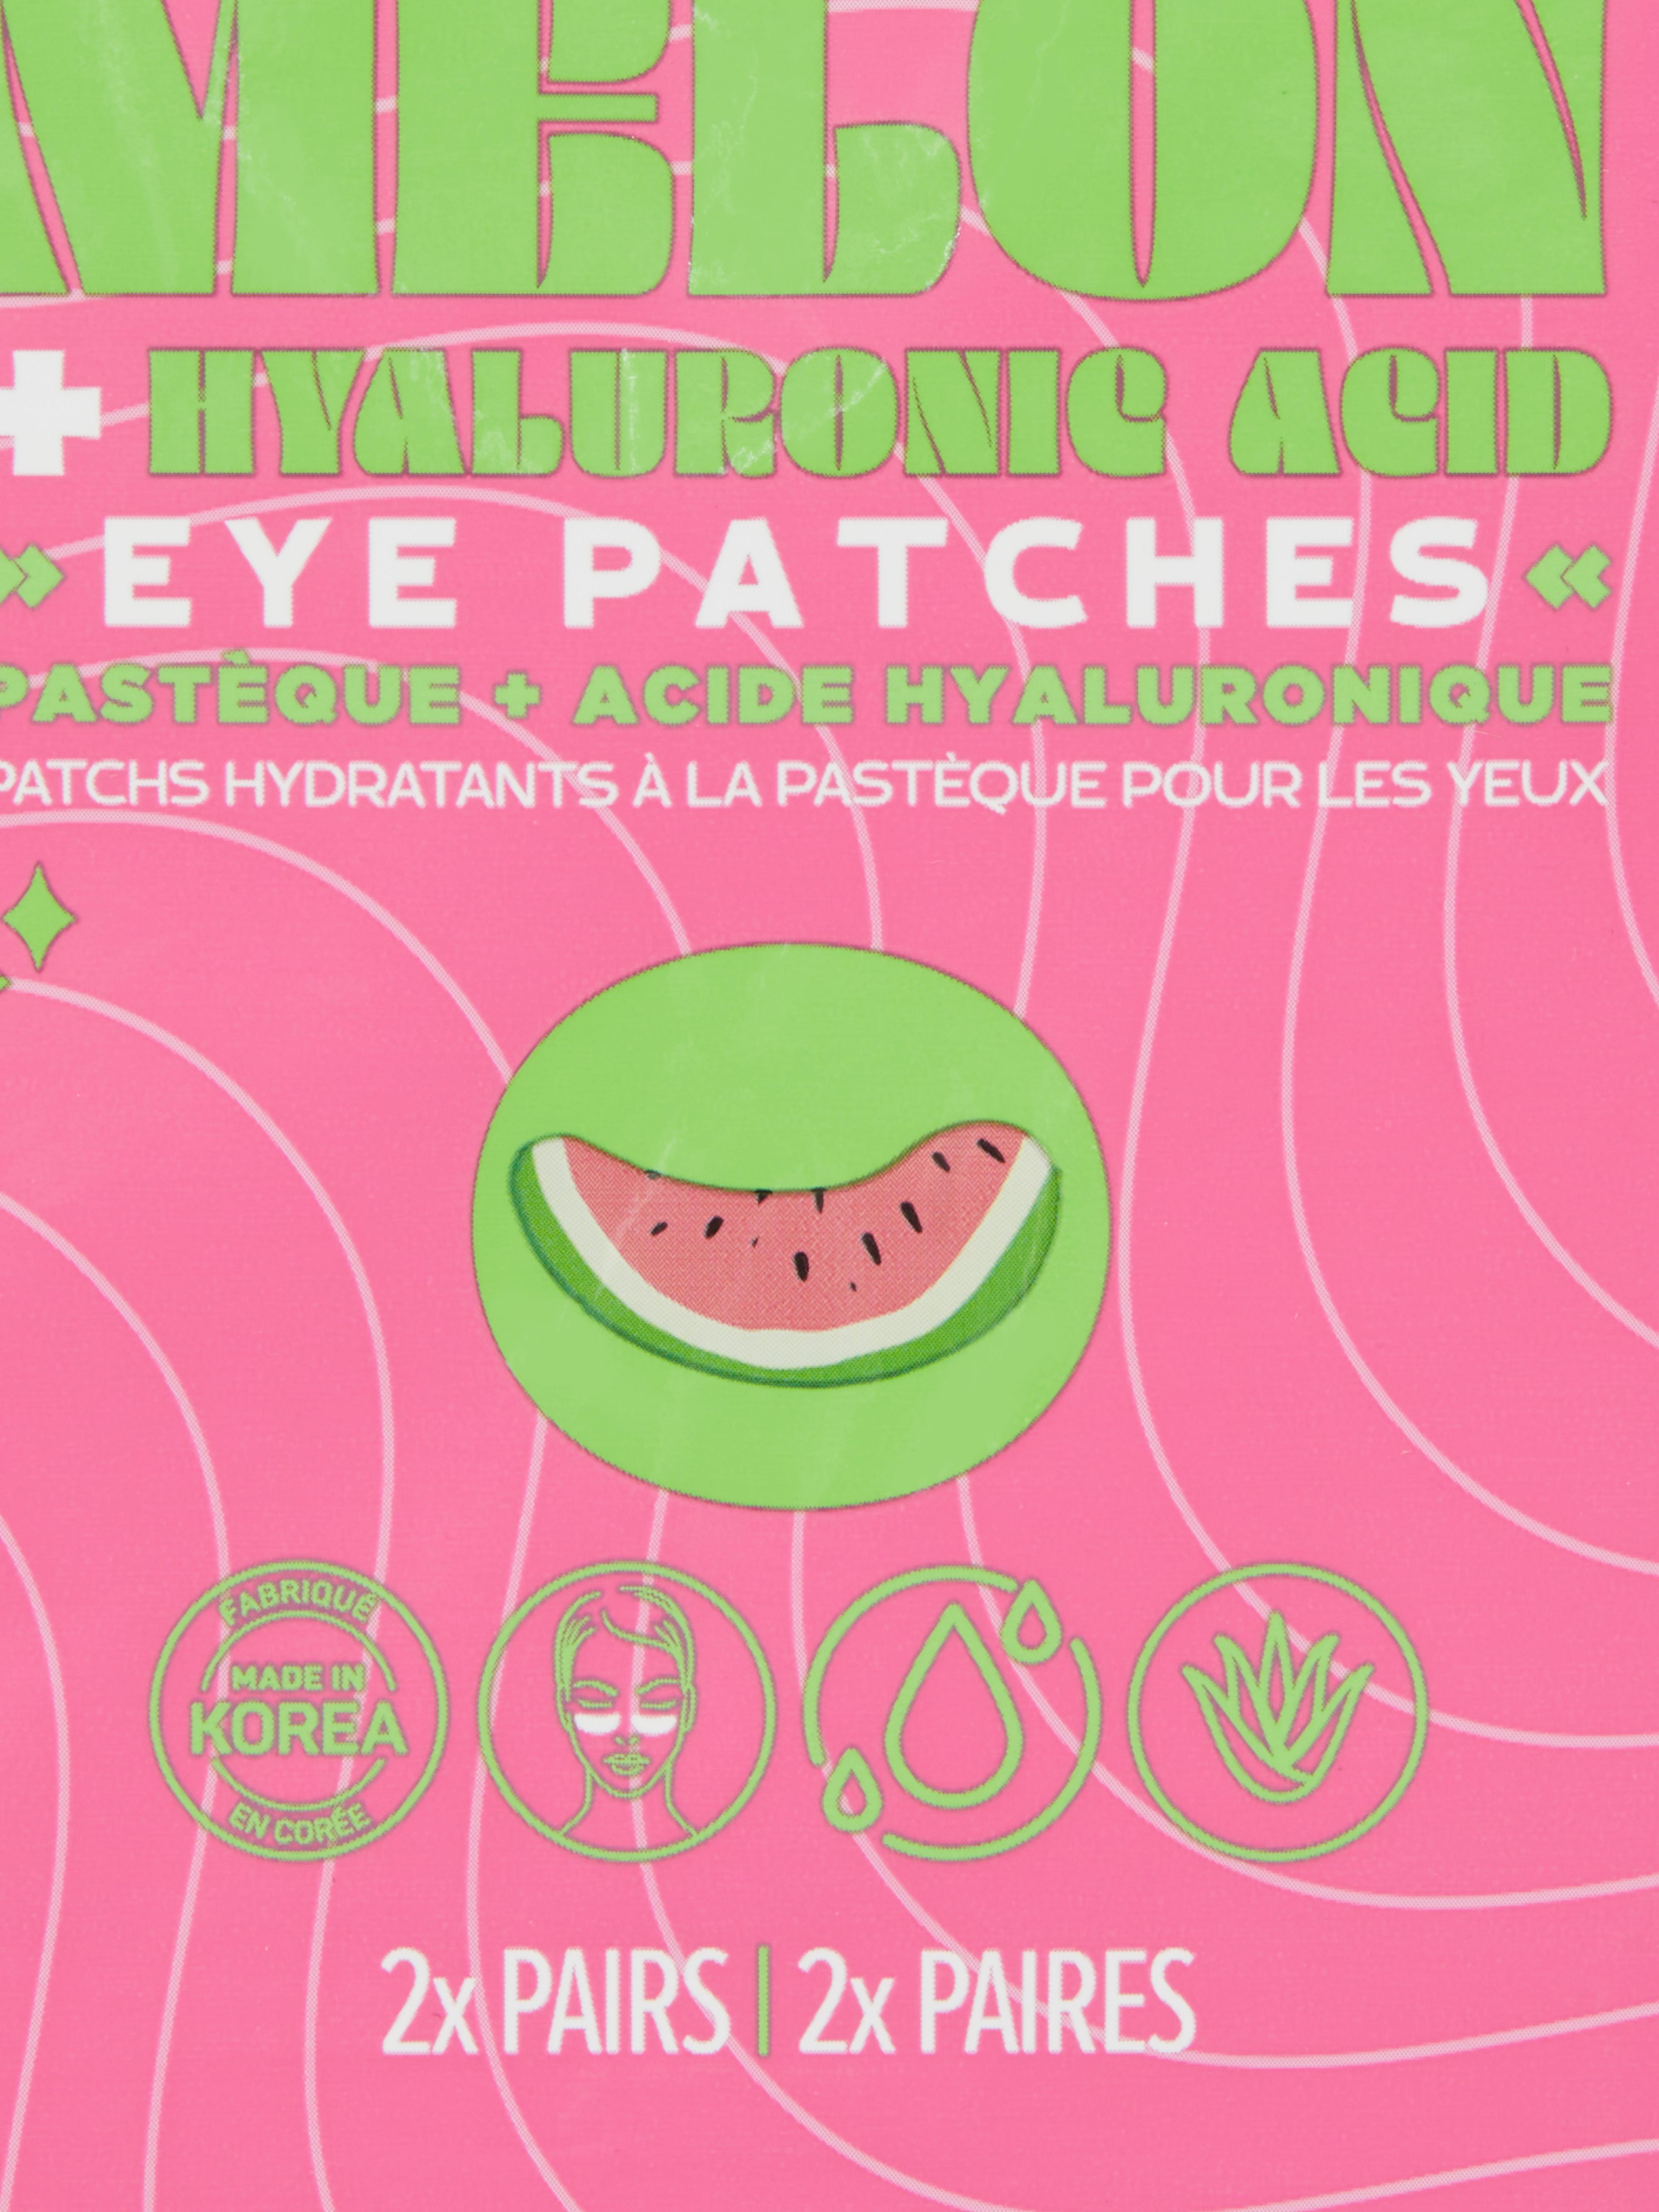 PS…Watermelon and Hyaluronic Acid Eye Patches